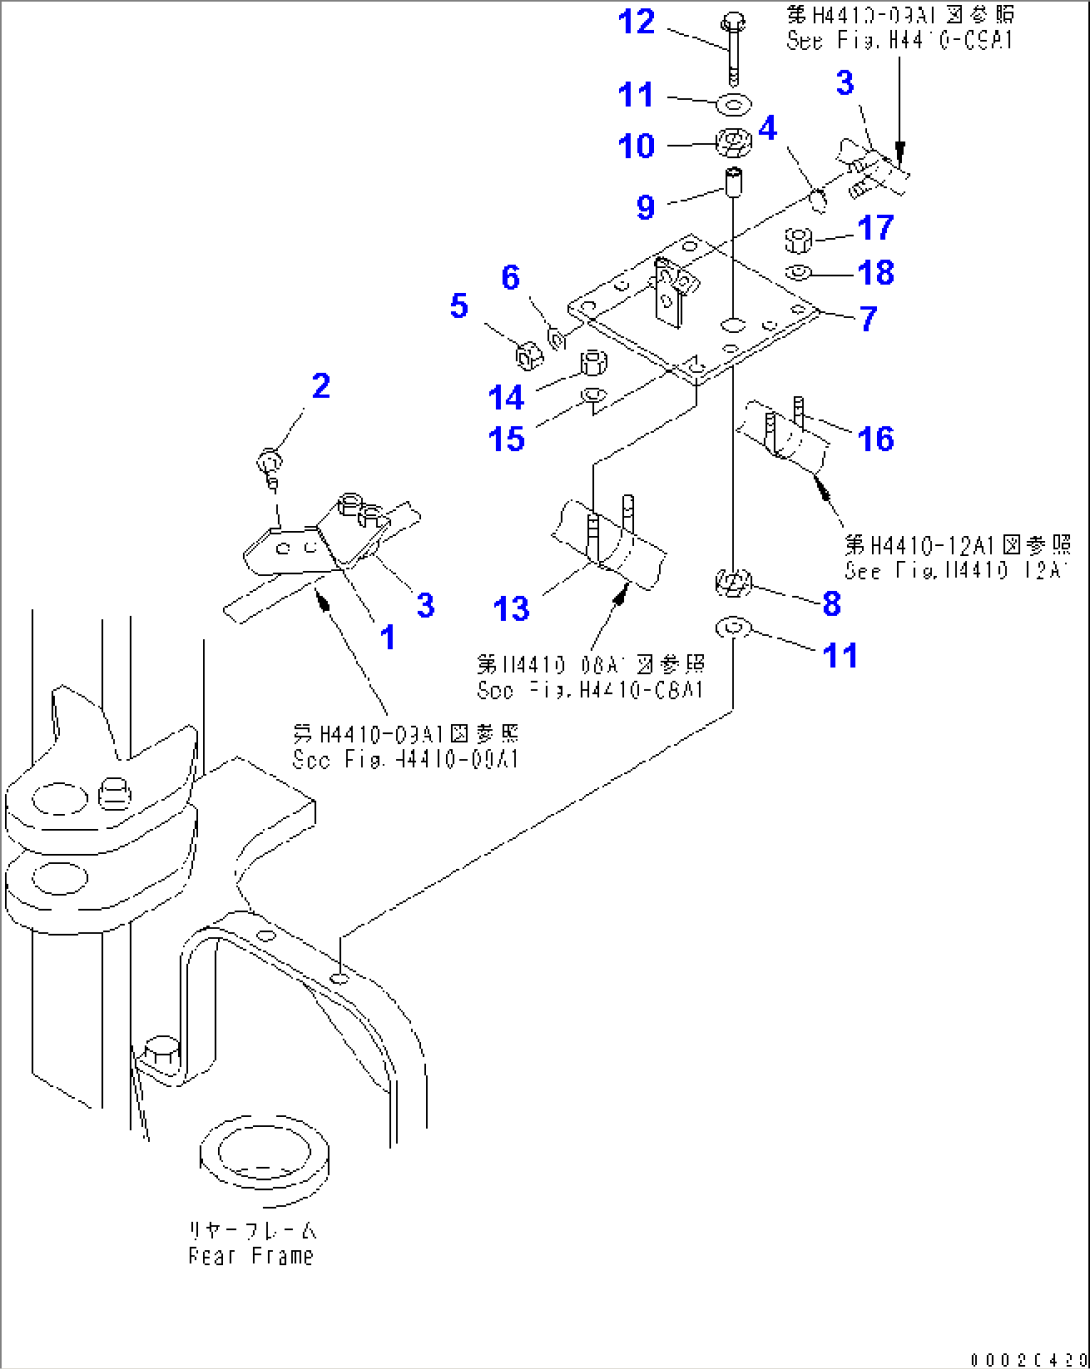 STEERING HYDRAULIC LINE (PIPING MOUNTING PARTS) (WITH EMERGENCY STEERING)